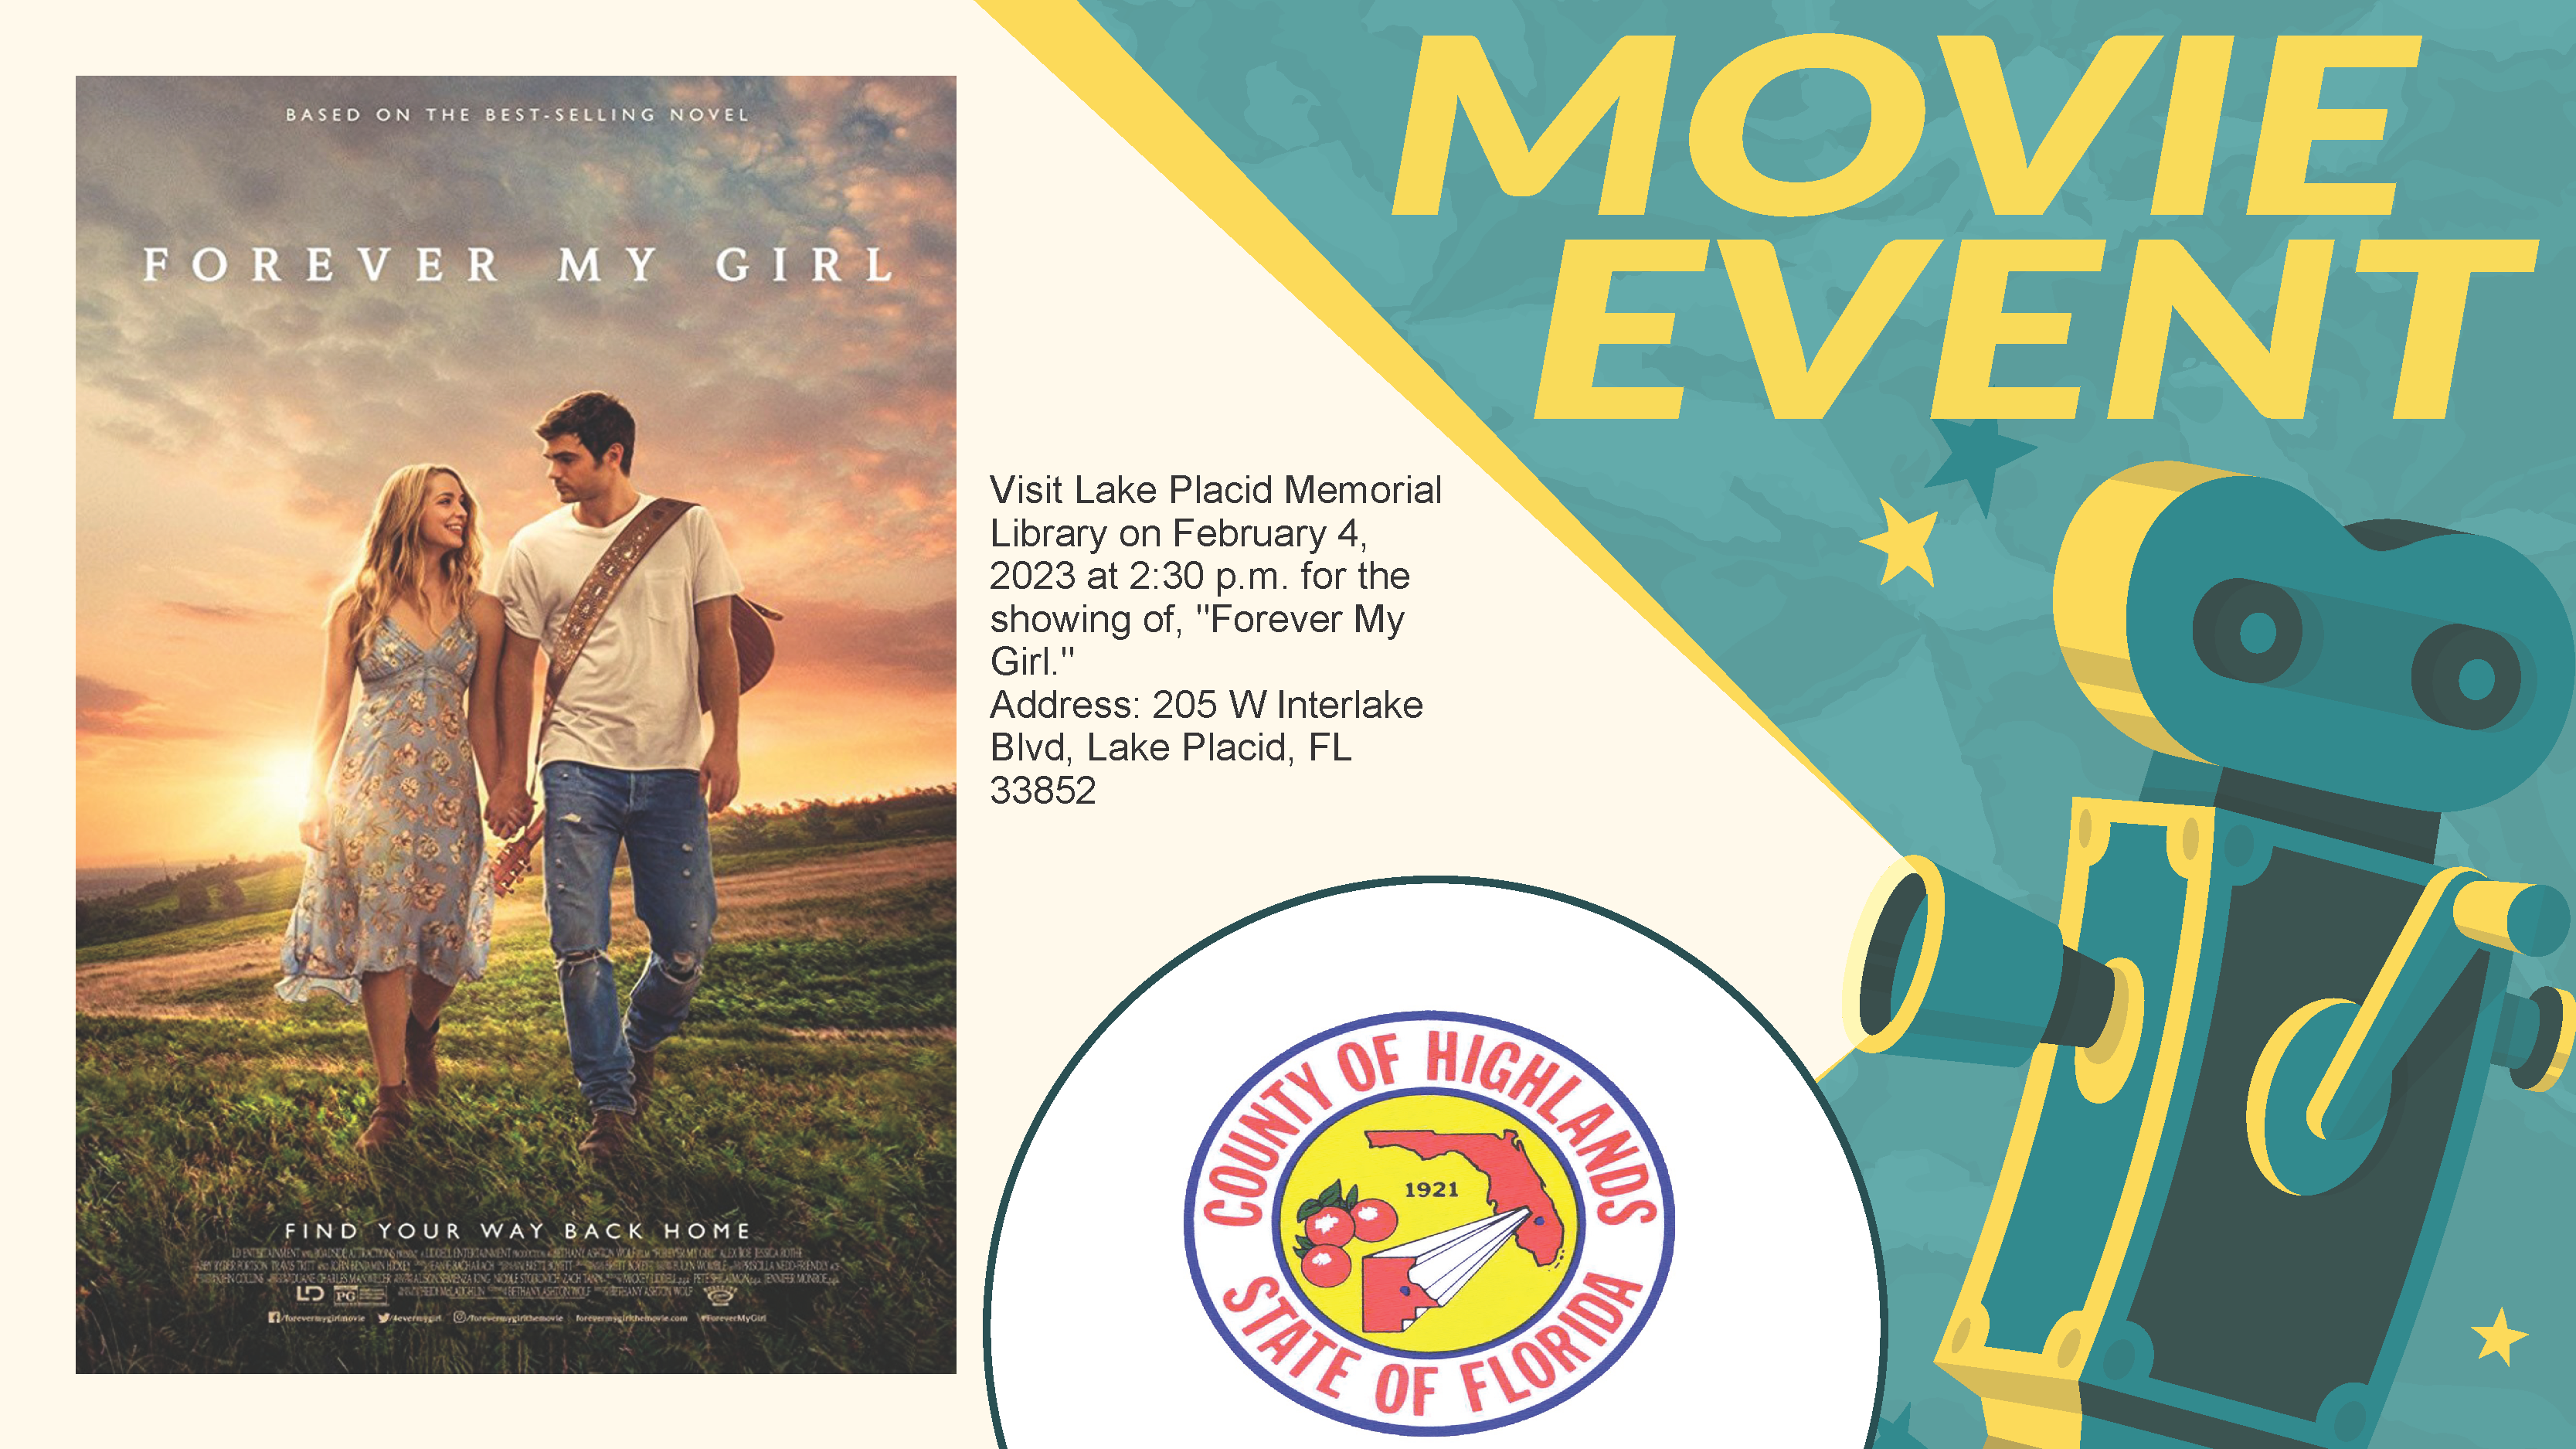 Visit Lake Placid Memorial Library on February 4, 2023 at 2:30 p.m. for the showing of, "Forever My Girl." Address: 205 W Interlake Blvd, Lake Placid, FL 33852